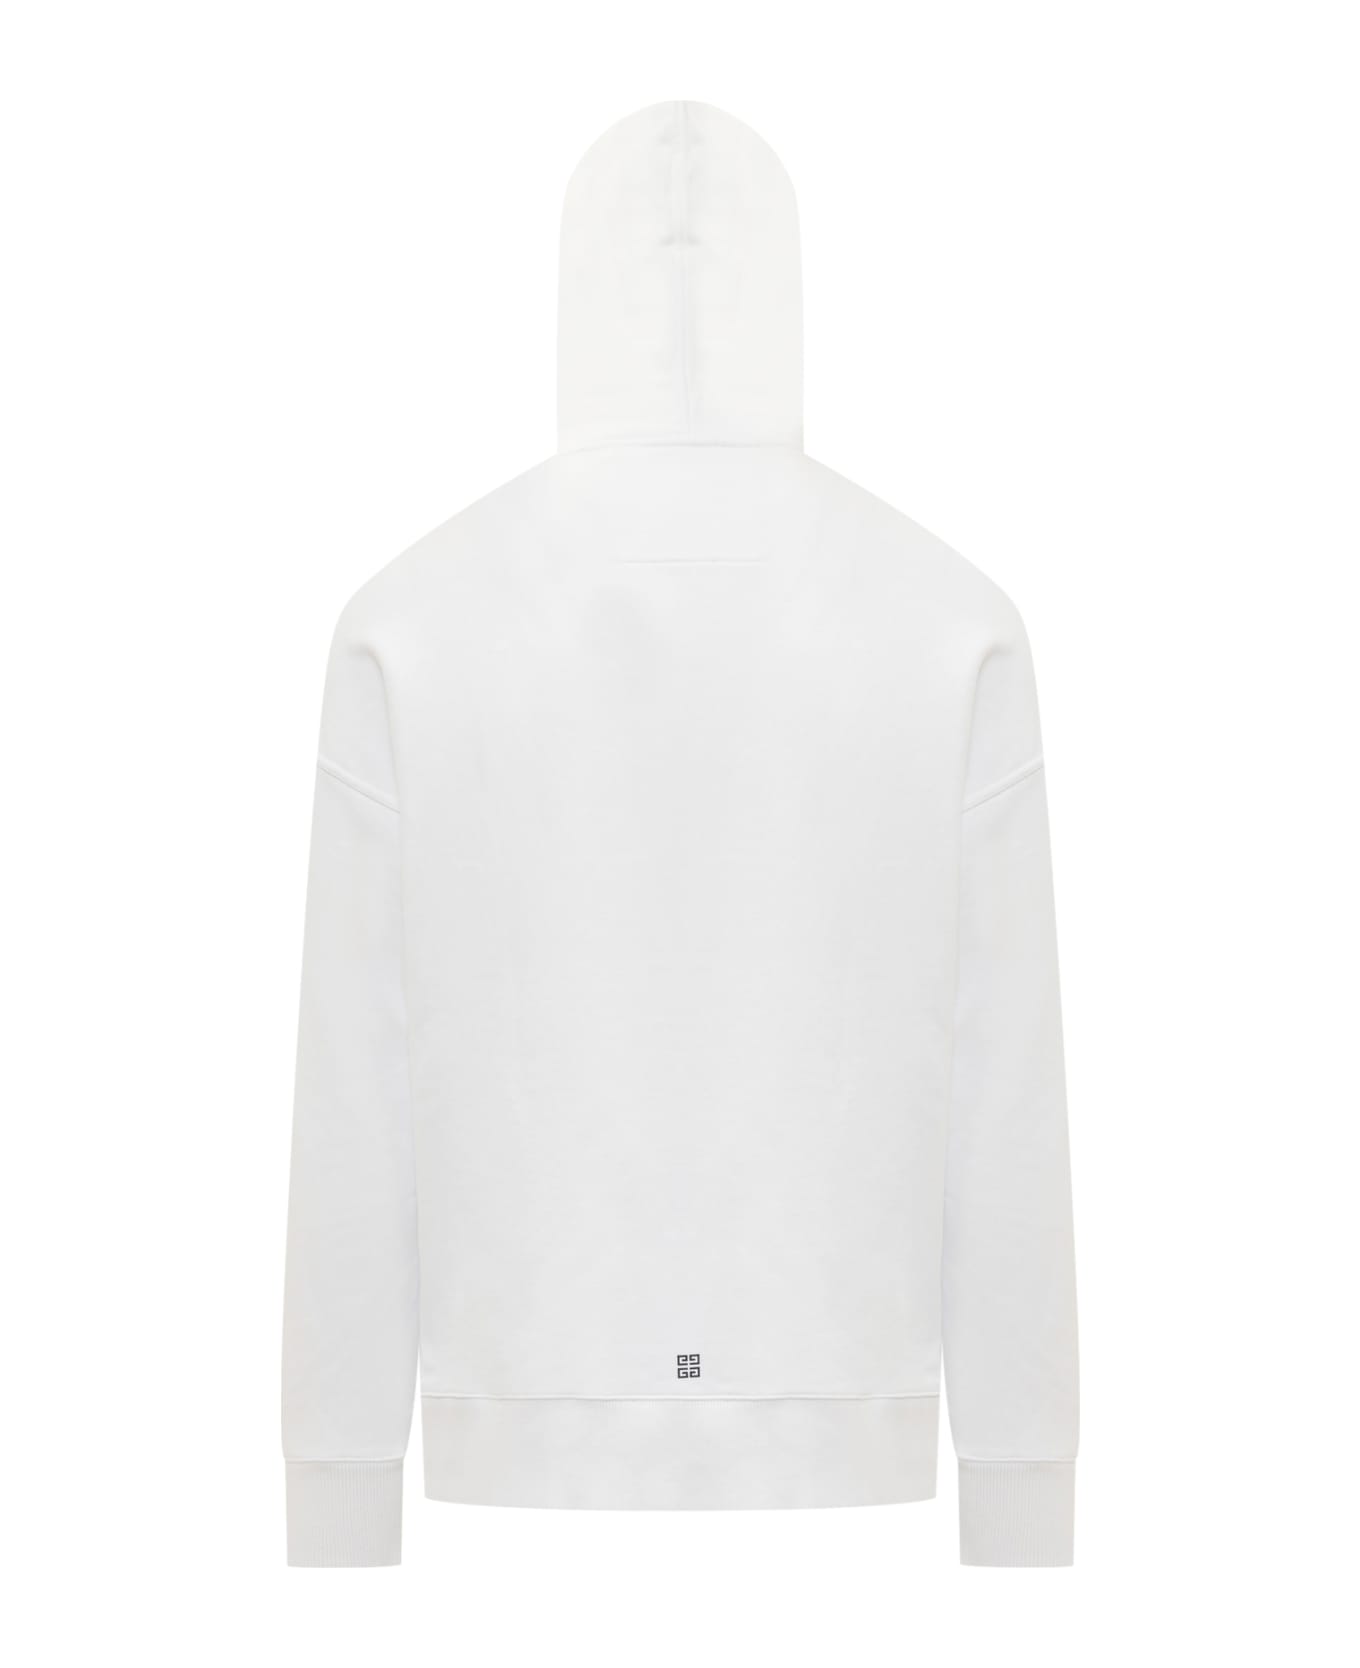 Givenchy Archetype Hoodie - White フリース